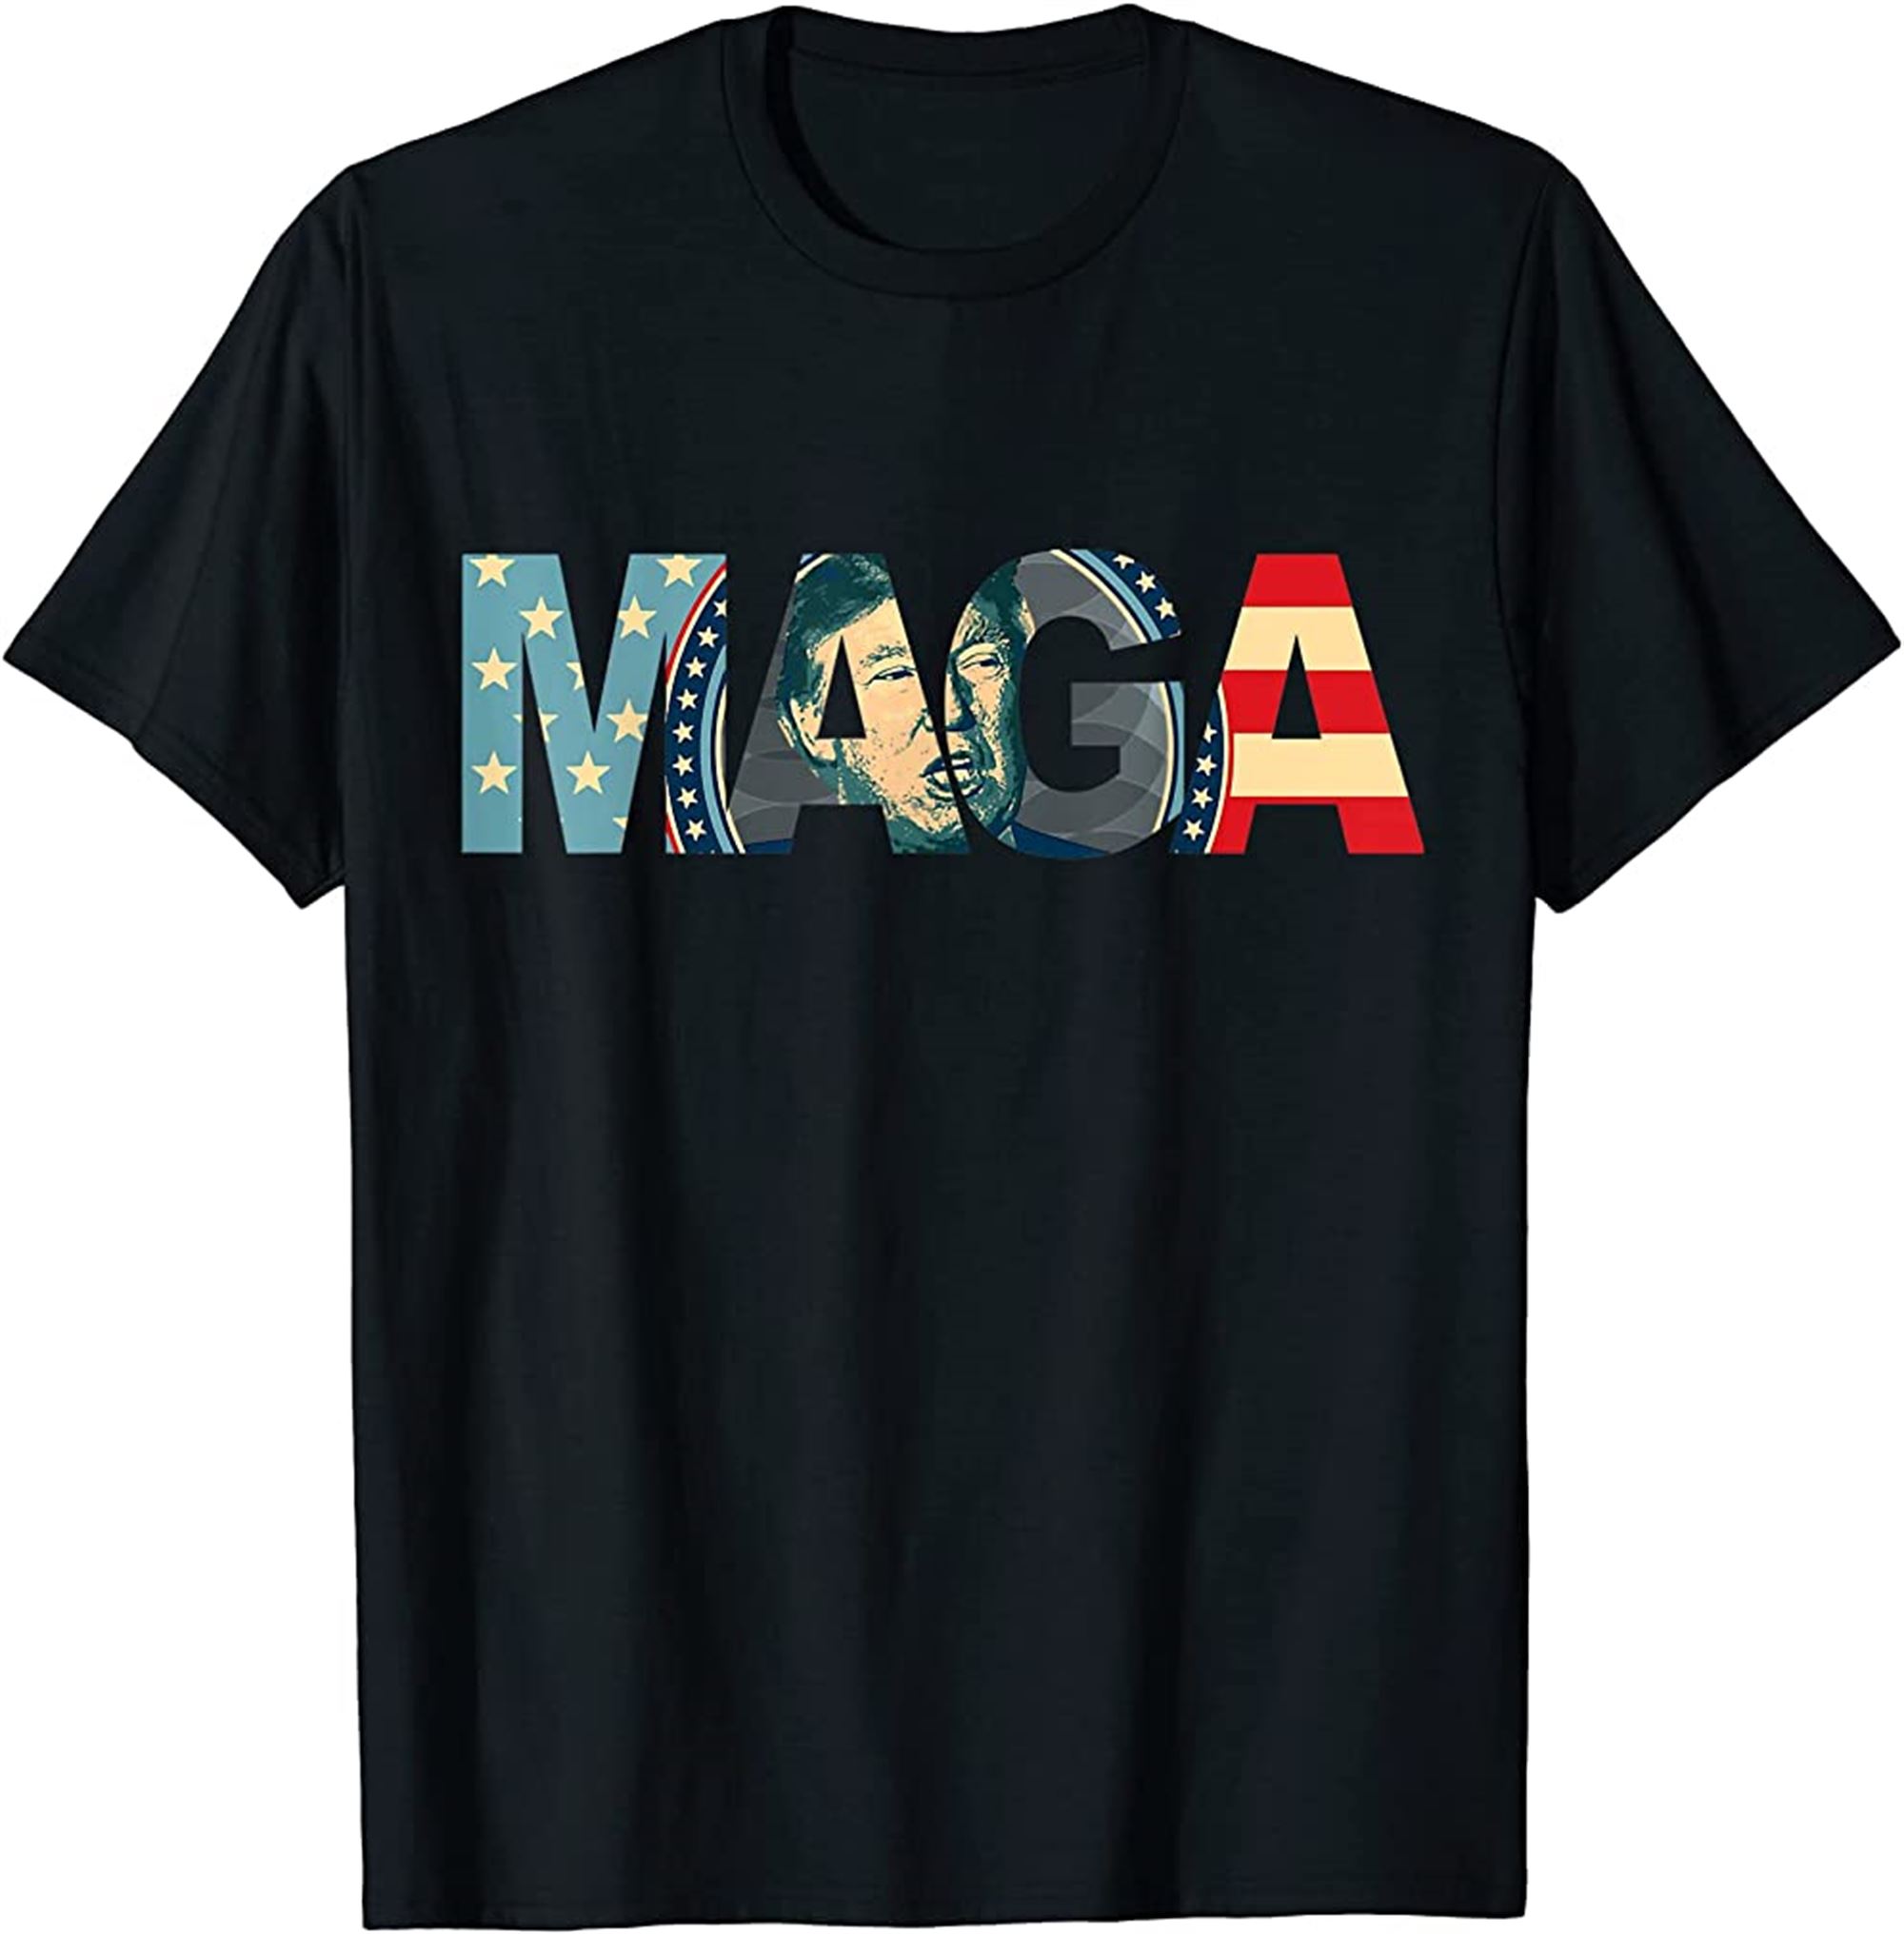 Trump 2020 Voted Maga American Flag Retro Vintage 4th July T-shirt Plus Size Up To 5xl